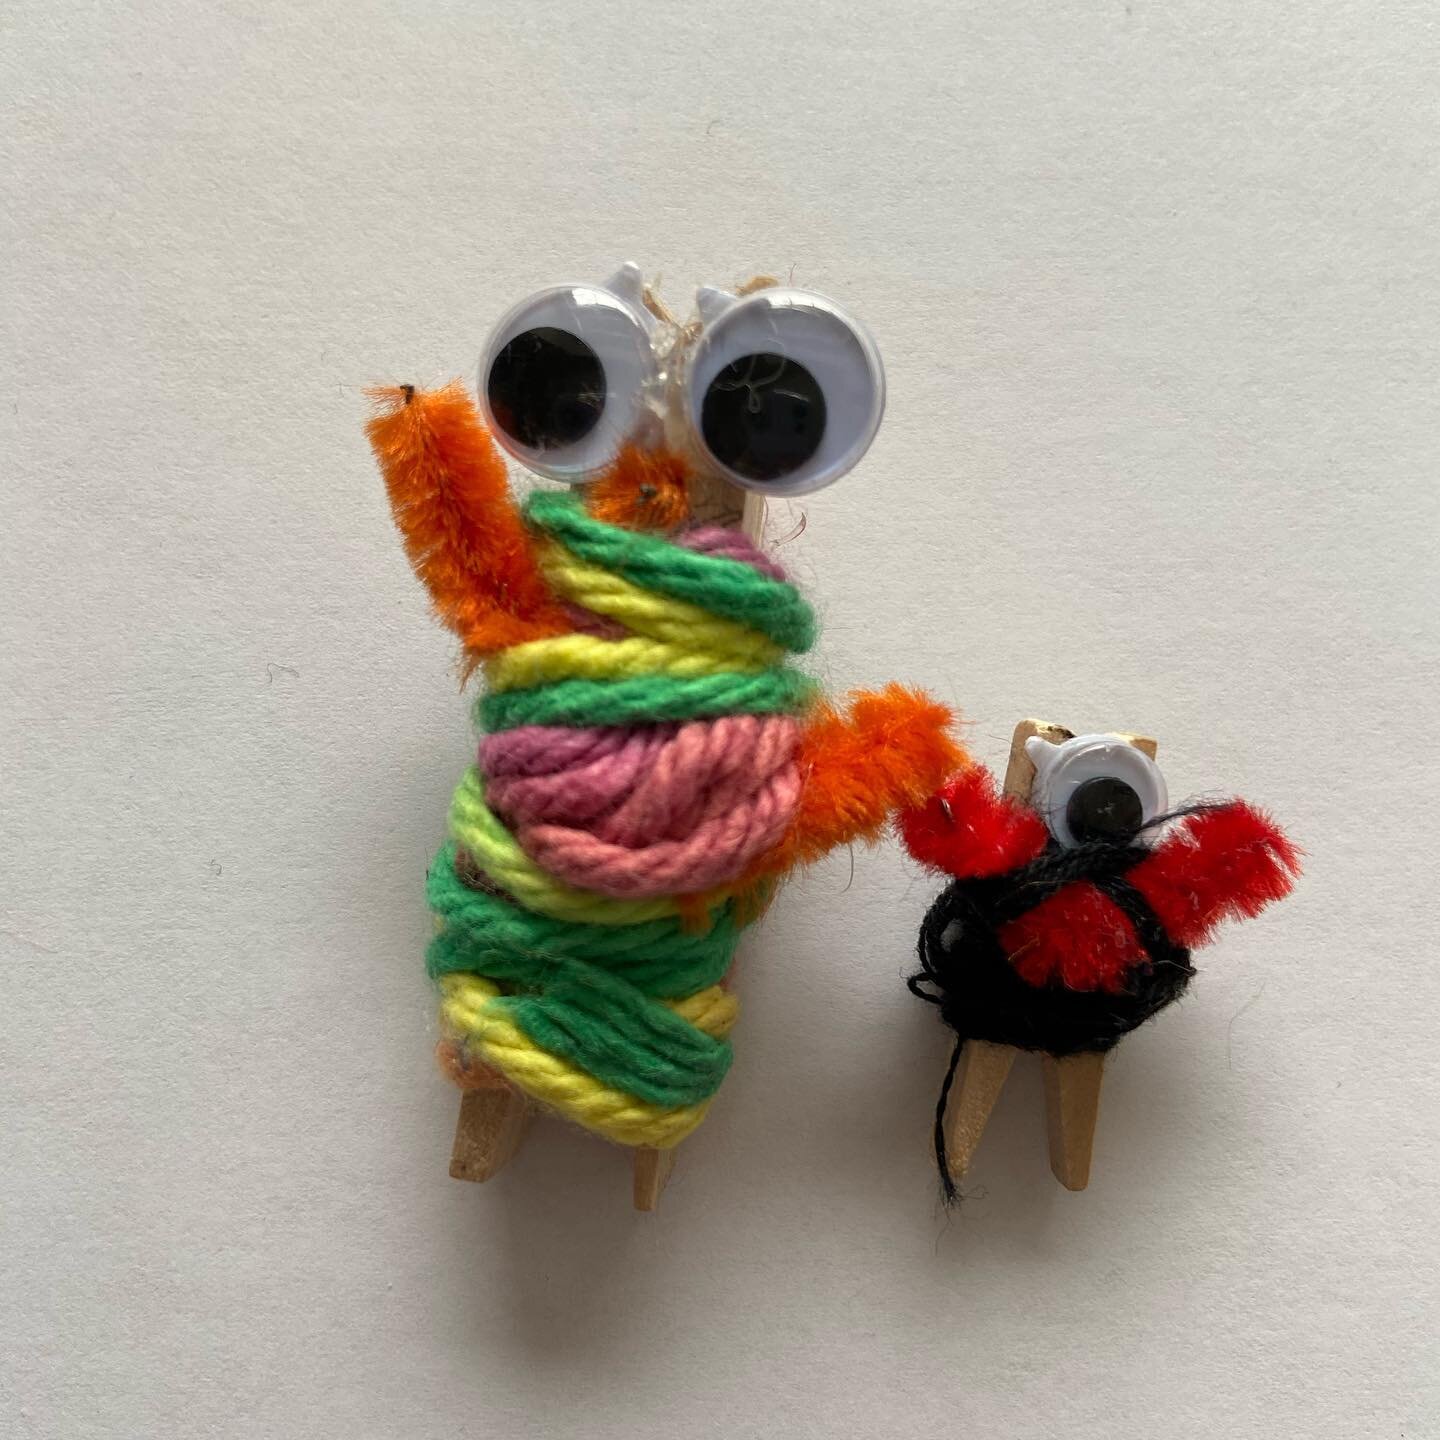 My son made worry dolls in school this spring and decided that his worry doll needed it&rsquo;s own worry doll!  They both keep me company at my desk every day 🥰 #proudmama #worryless #worrydoll